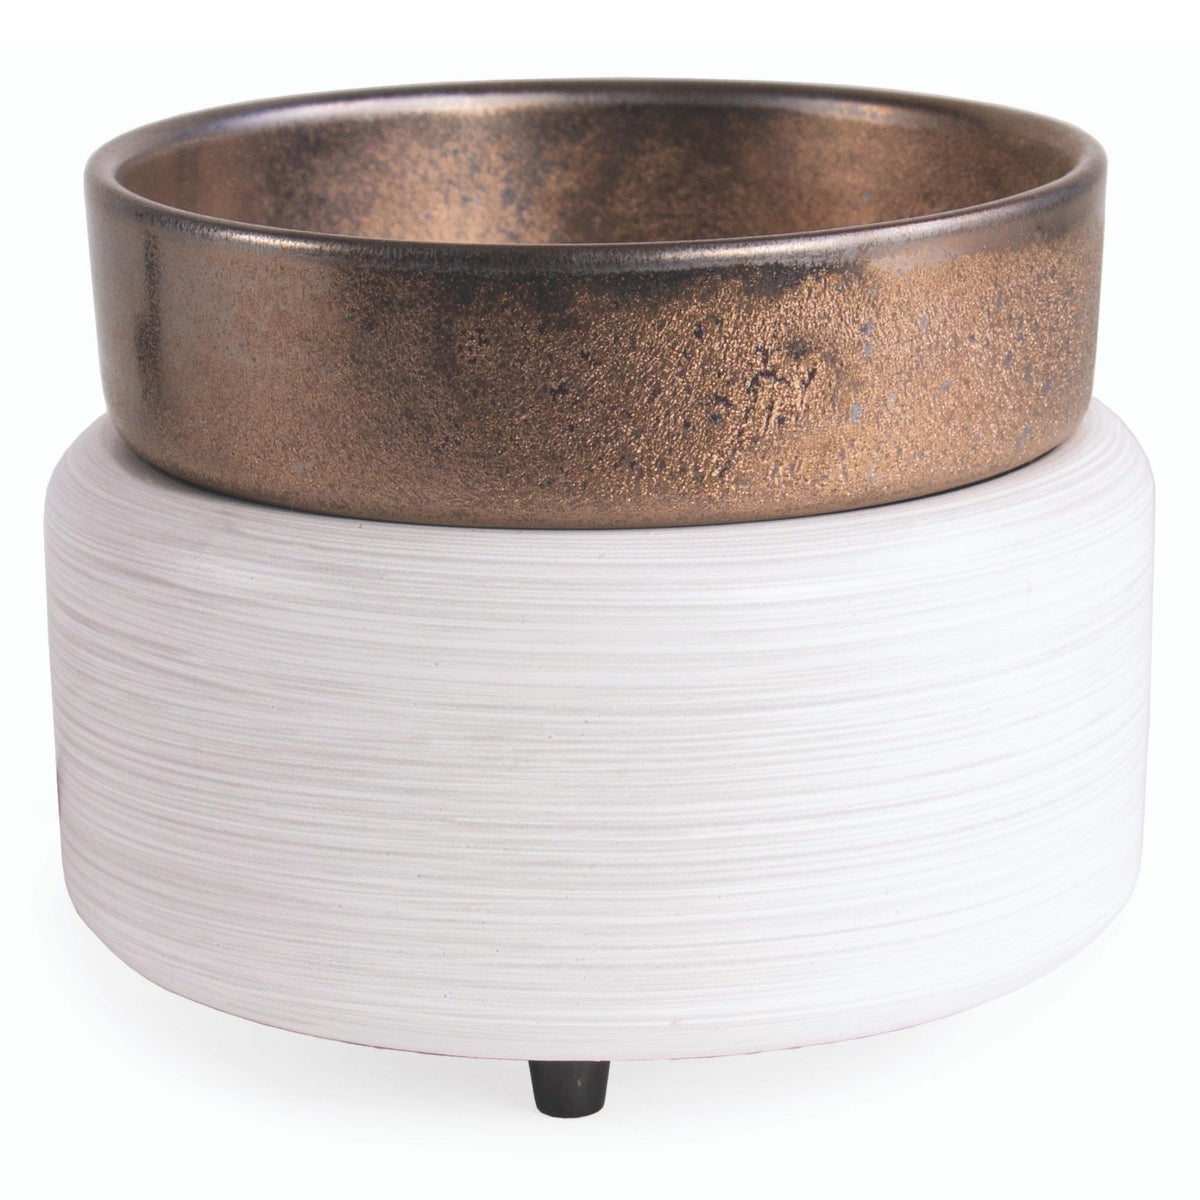 2-in-1 Classic Fragrance Warmer - White Washed Bronze